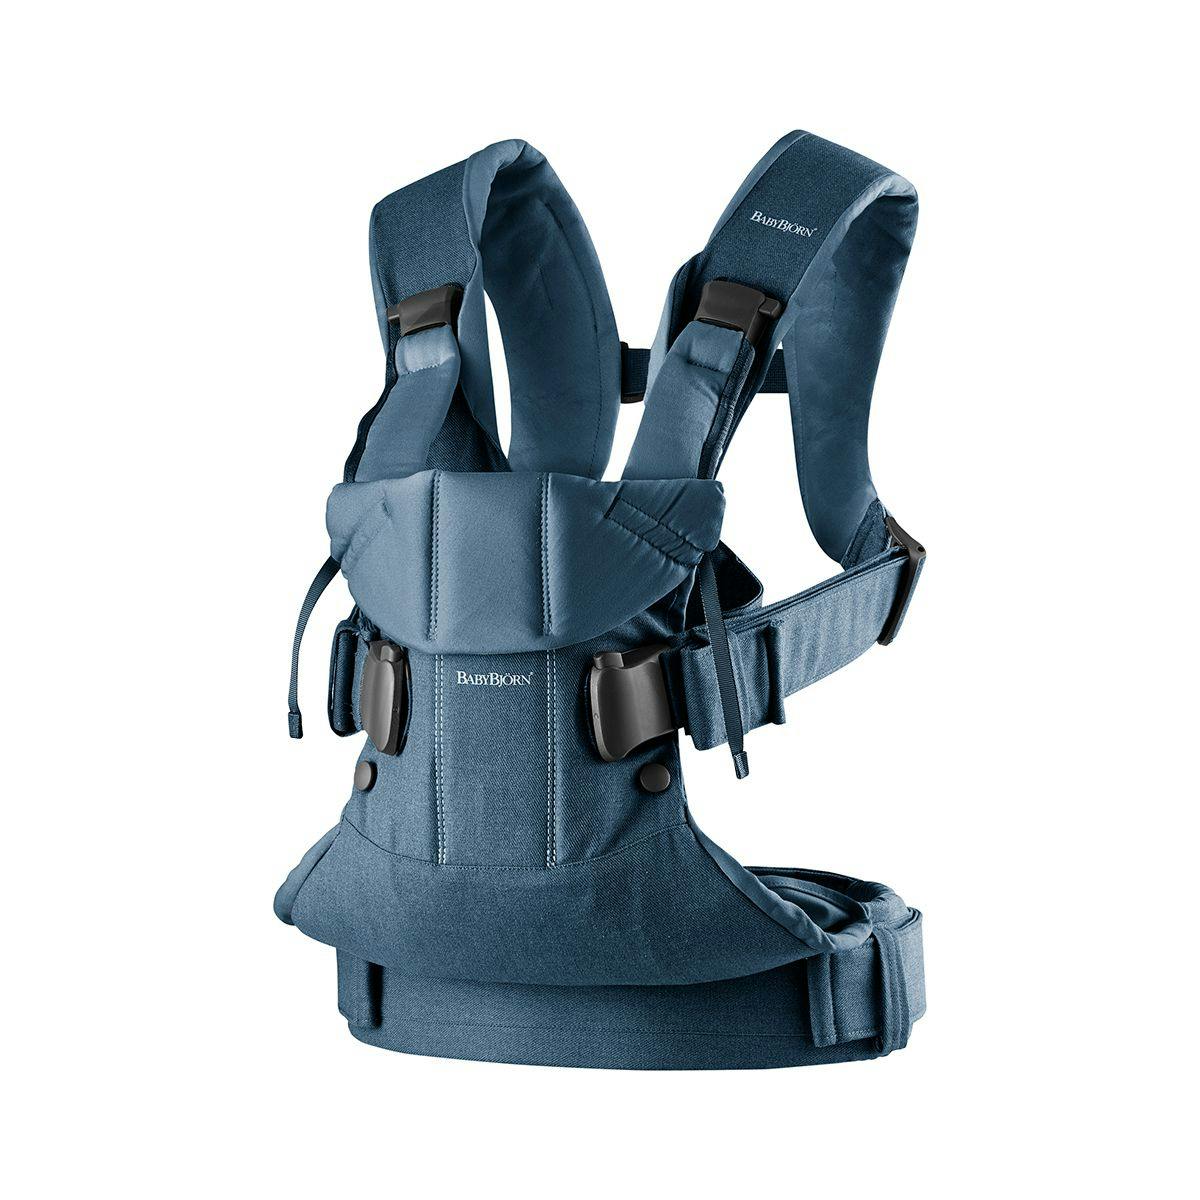 BabyBjörn Baby Carrier One